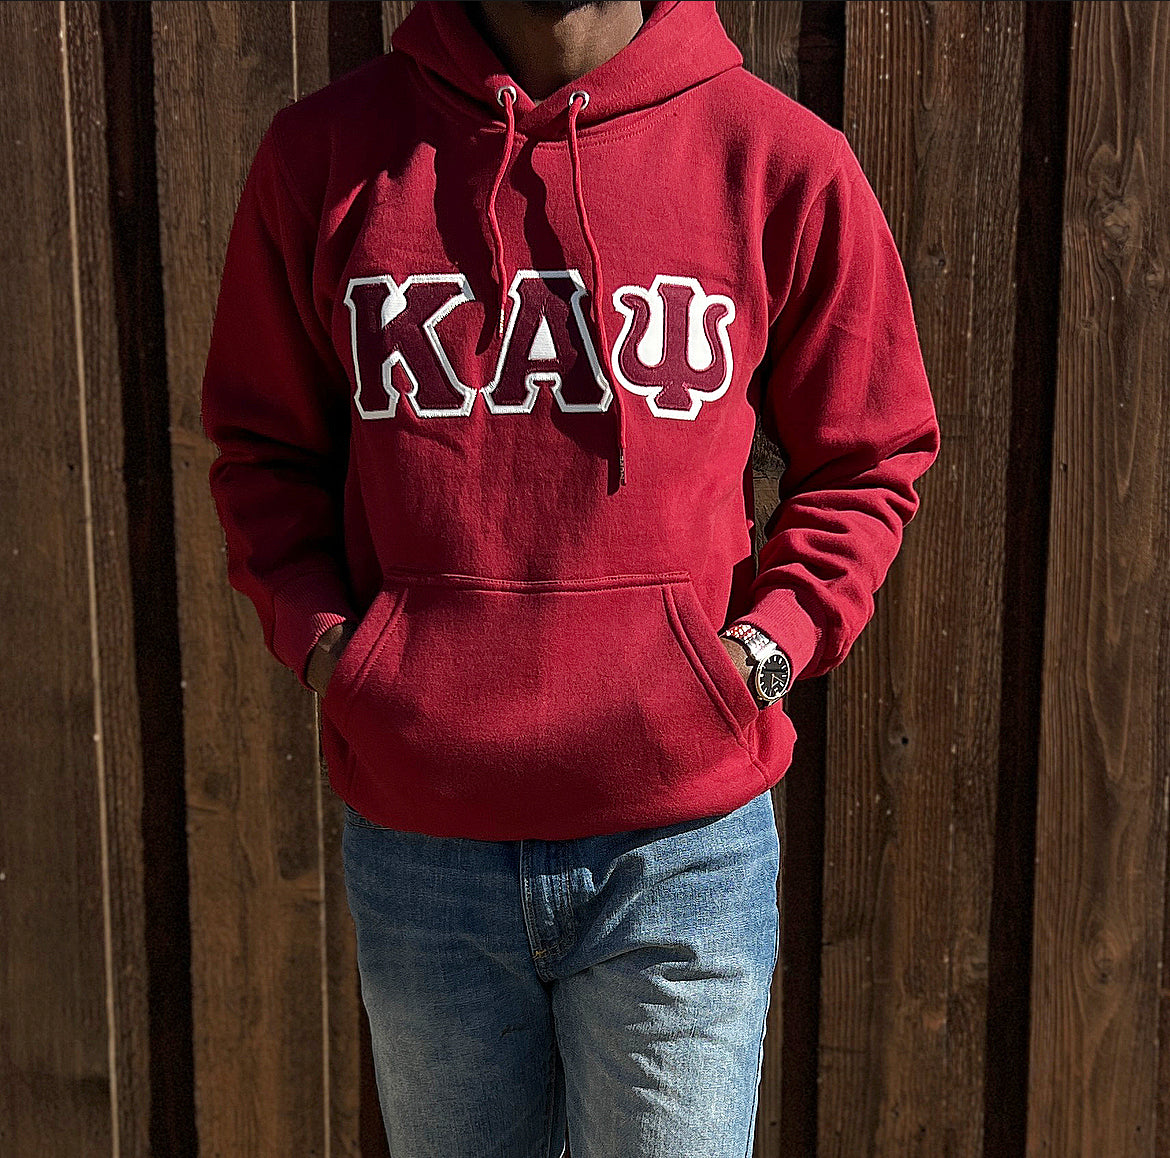 Kappa Alpha Psi Premium Double Stitched Appliqué Embroidery Lettered Hoodie. This is the perfect long-sleeved hoodie to wear while showing off your Kappa Alpha Psi fraternity lettering. A comfortable 100% cotton tee with a twill Greek letters embroidery across the chest give you the perfect fit. This hoodie is also a perfect gift for your favorite Kappa Man.